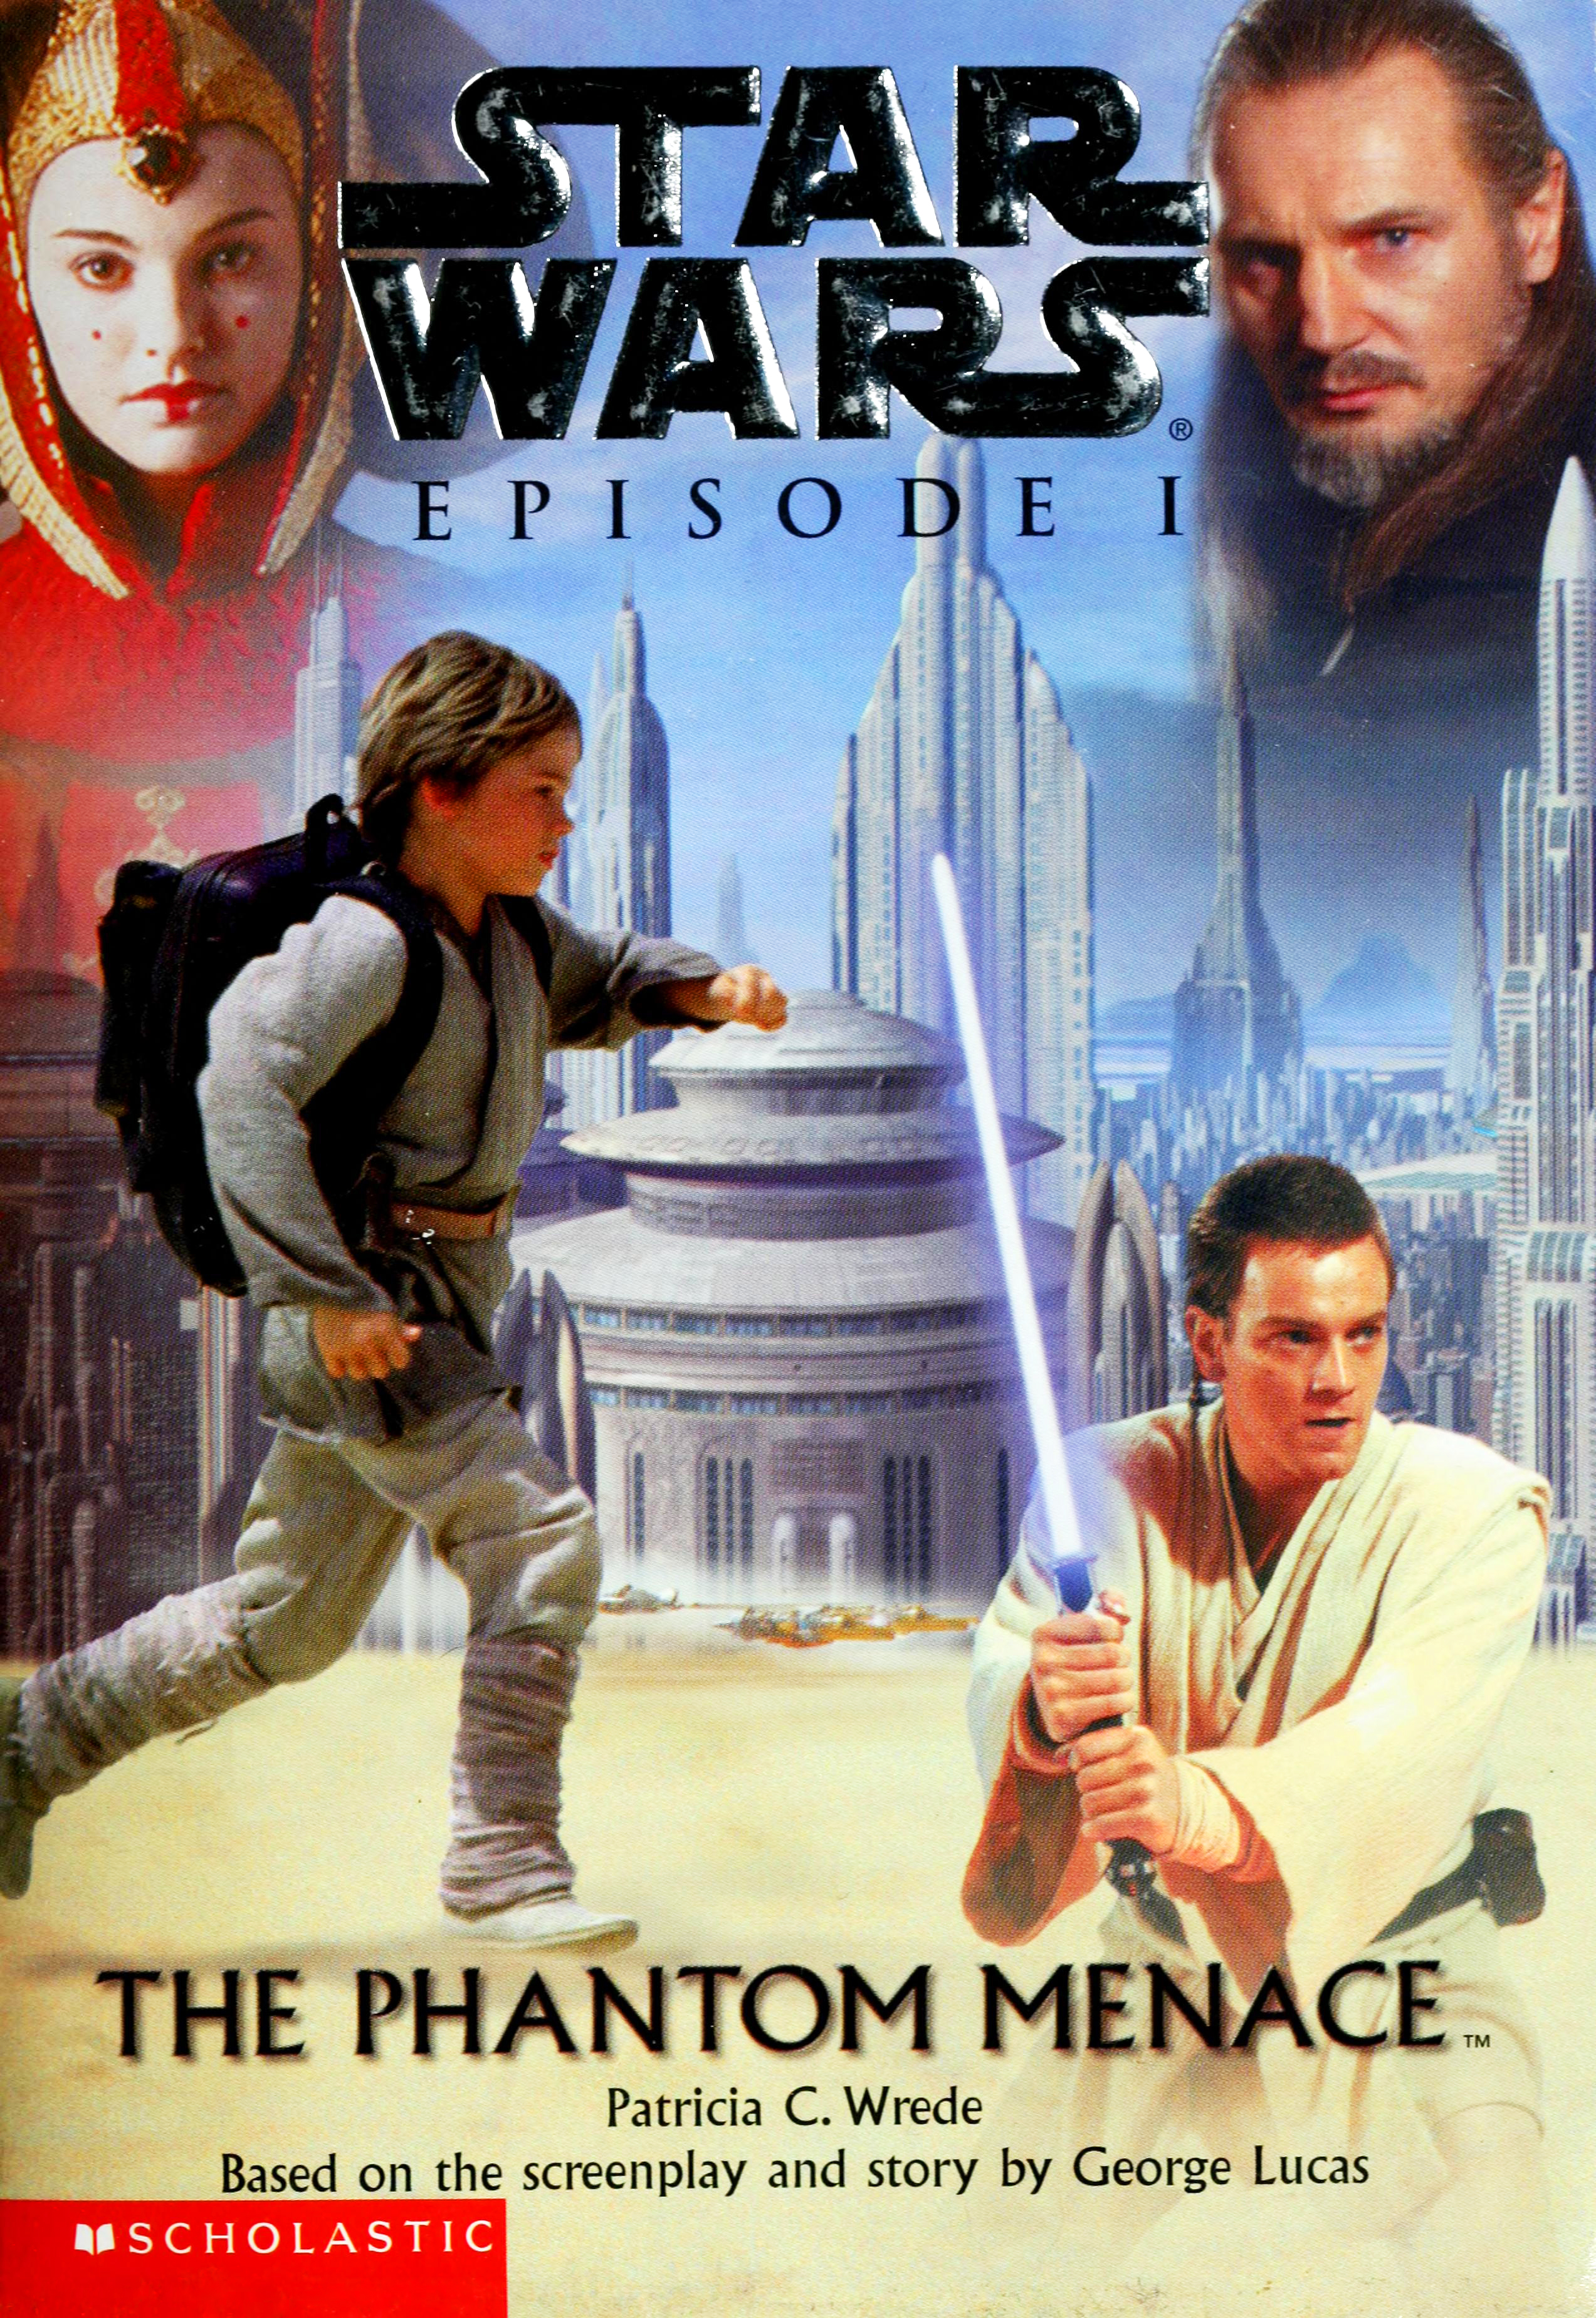 Star Wars Ep. I: The Phantom Menace download the new version for ios